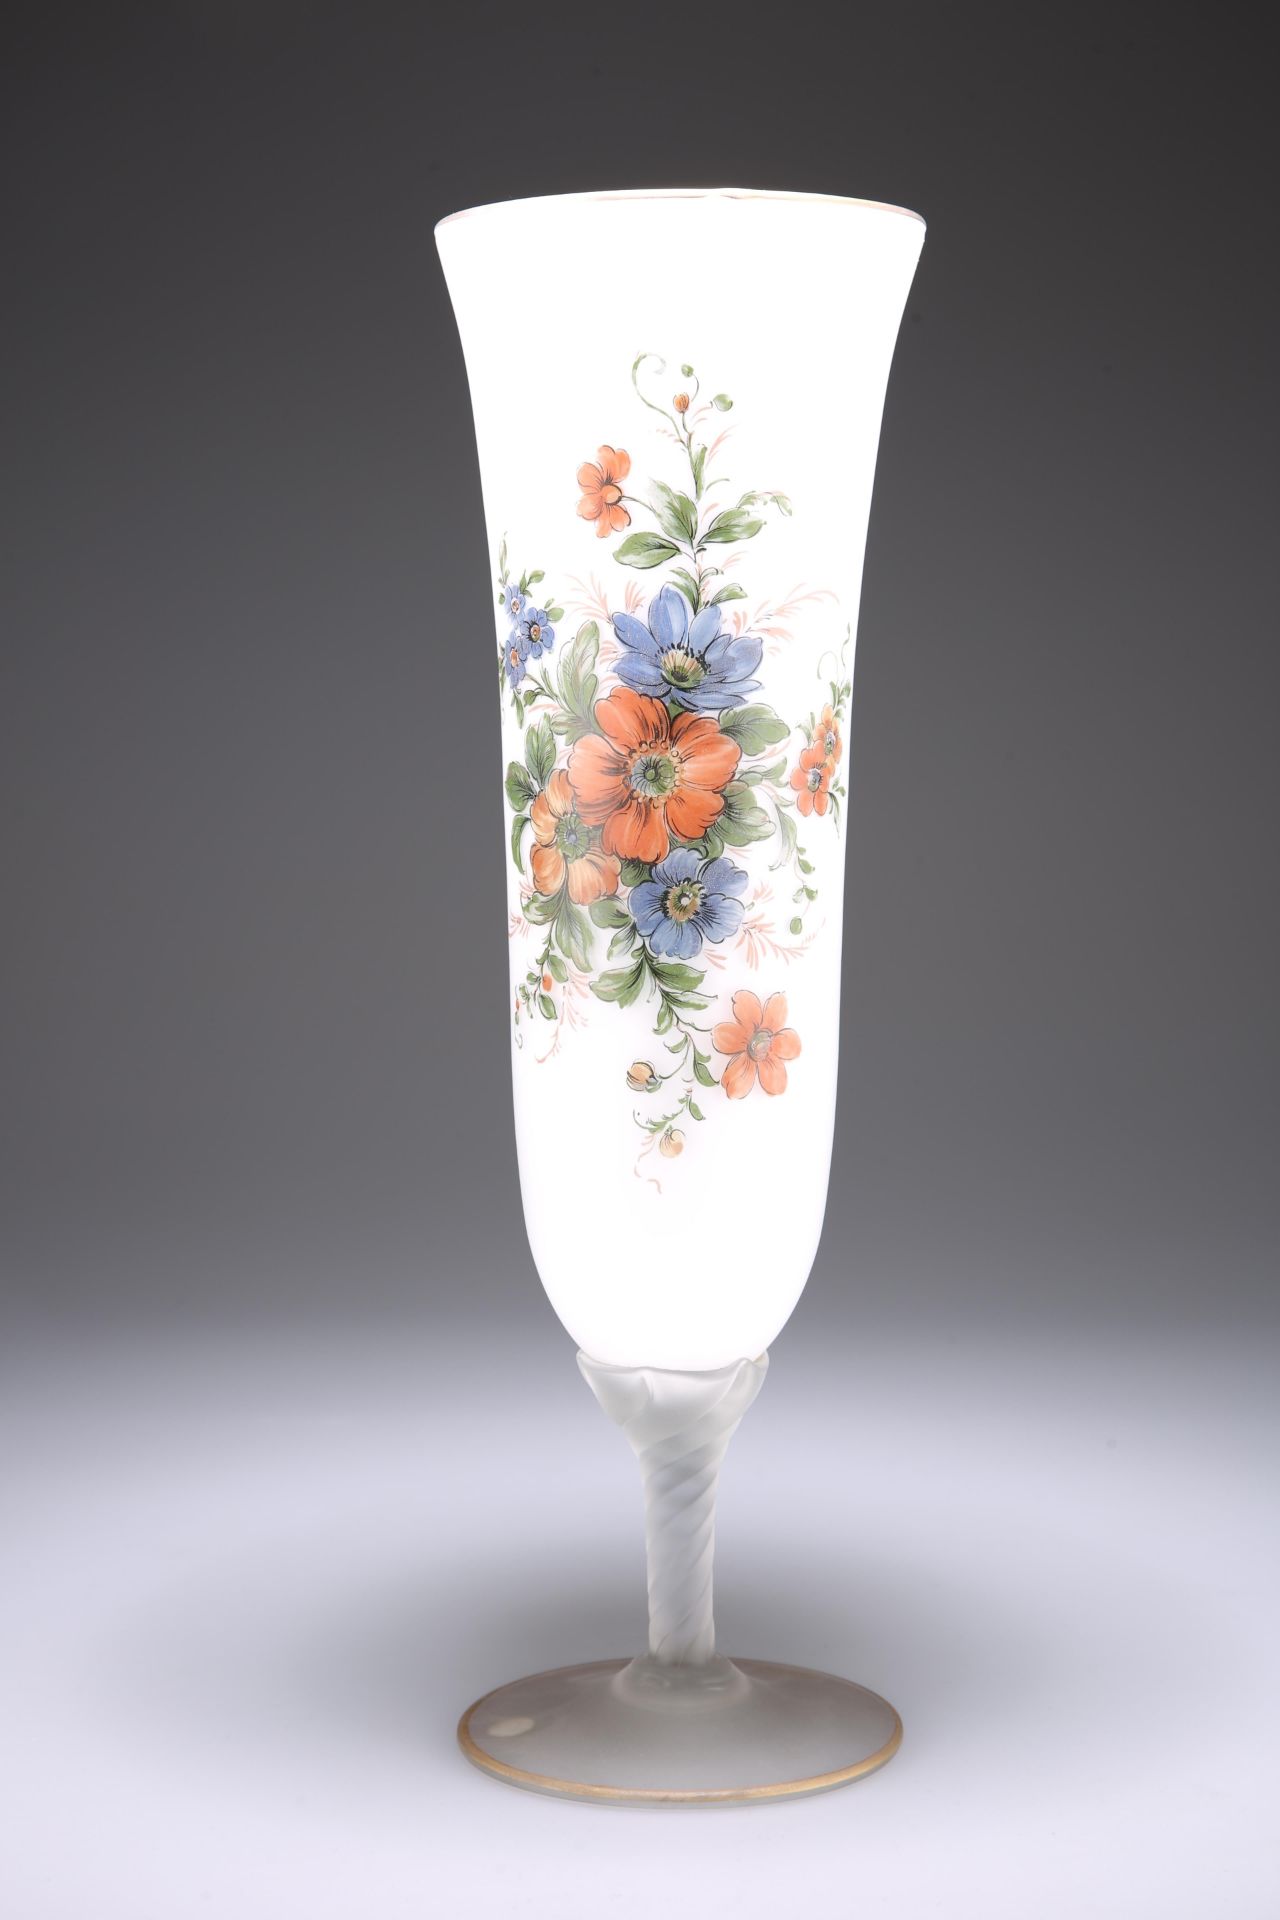 A RICHARDSON OPALINE FROSTED GLASS VASE, the bowl of elongated trumpet form, painted with a floral